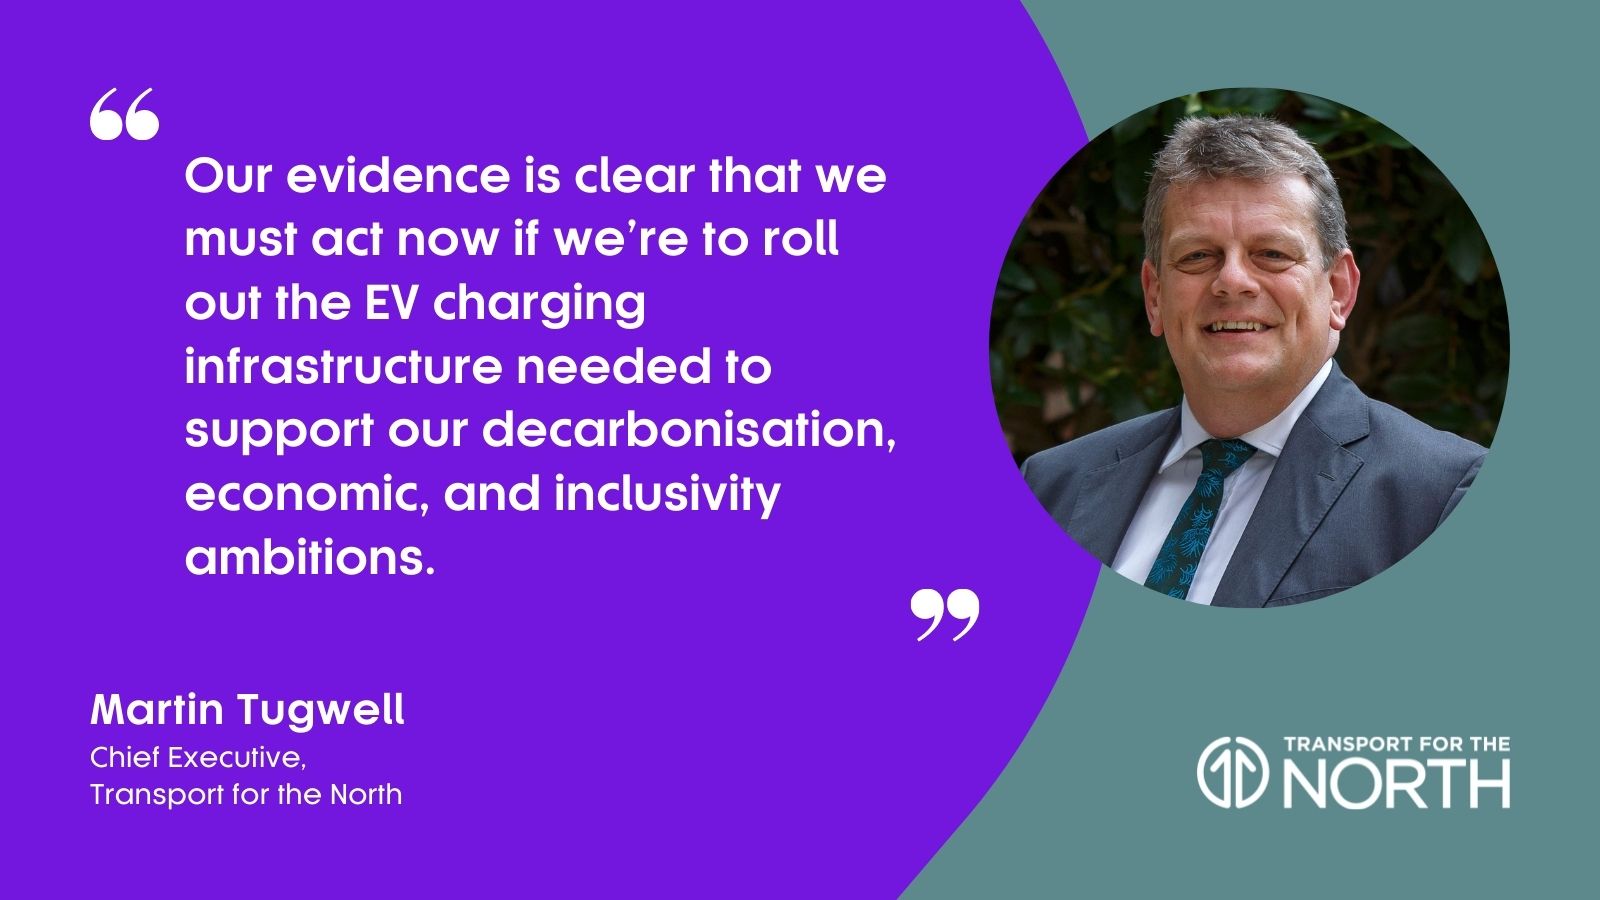 Quote by Martin Tugwell on the need for Electric Vehicle charging infrastructure